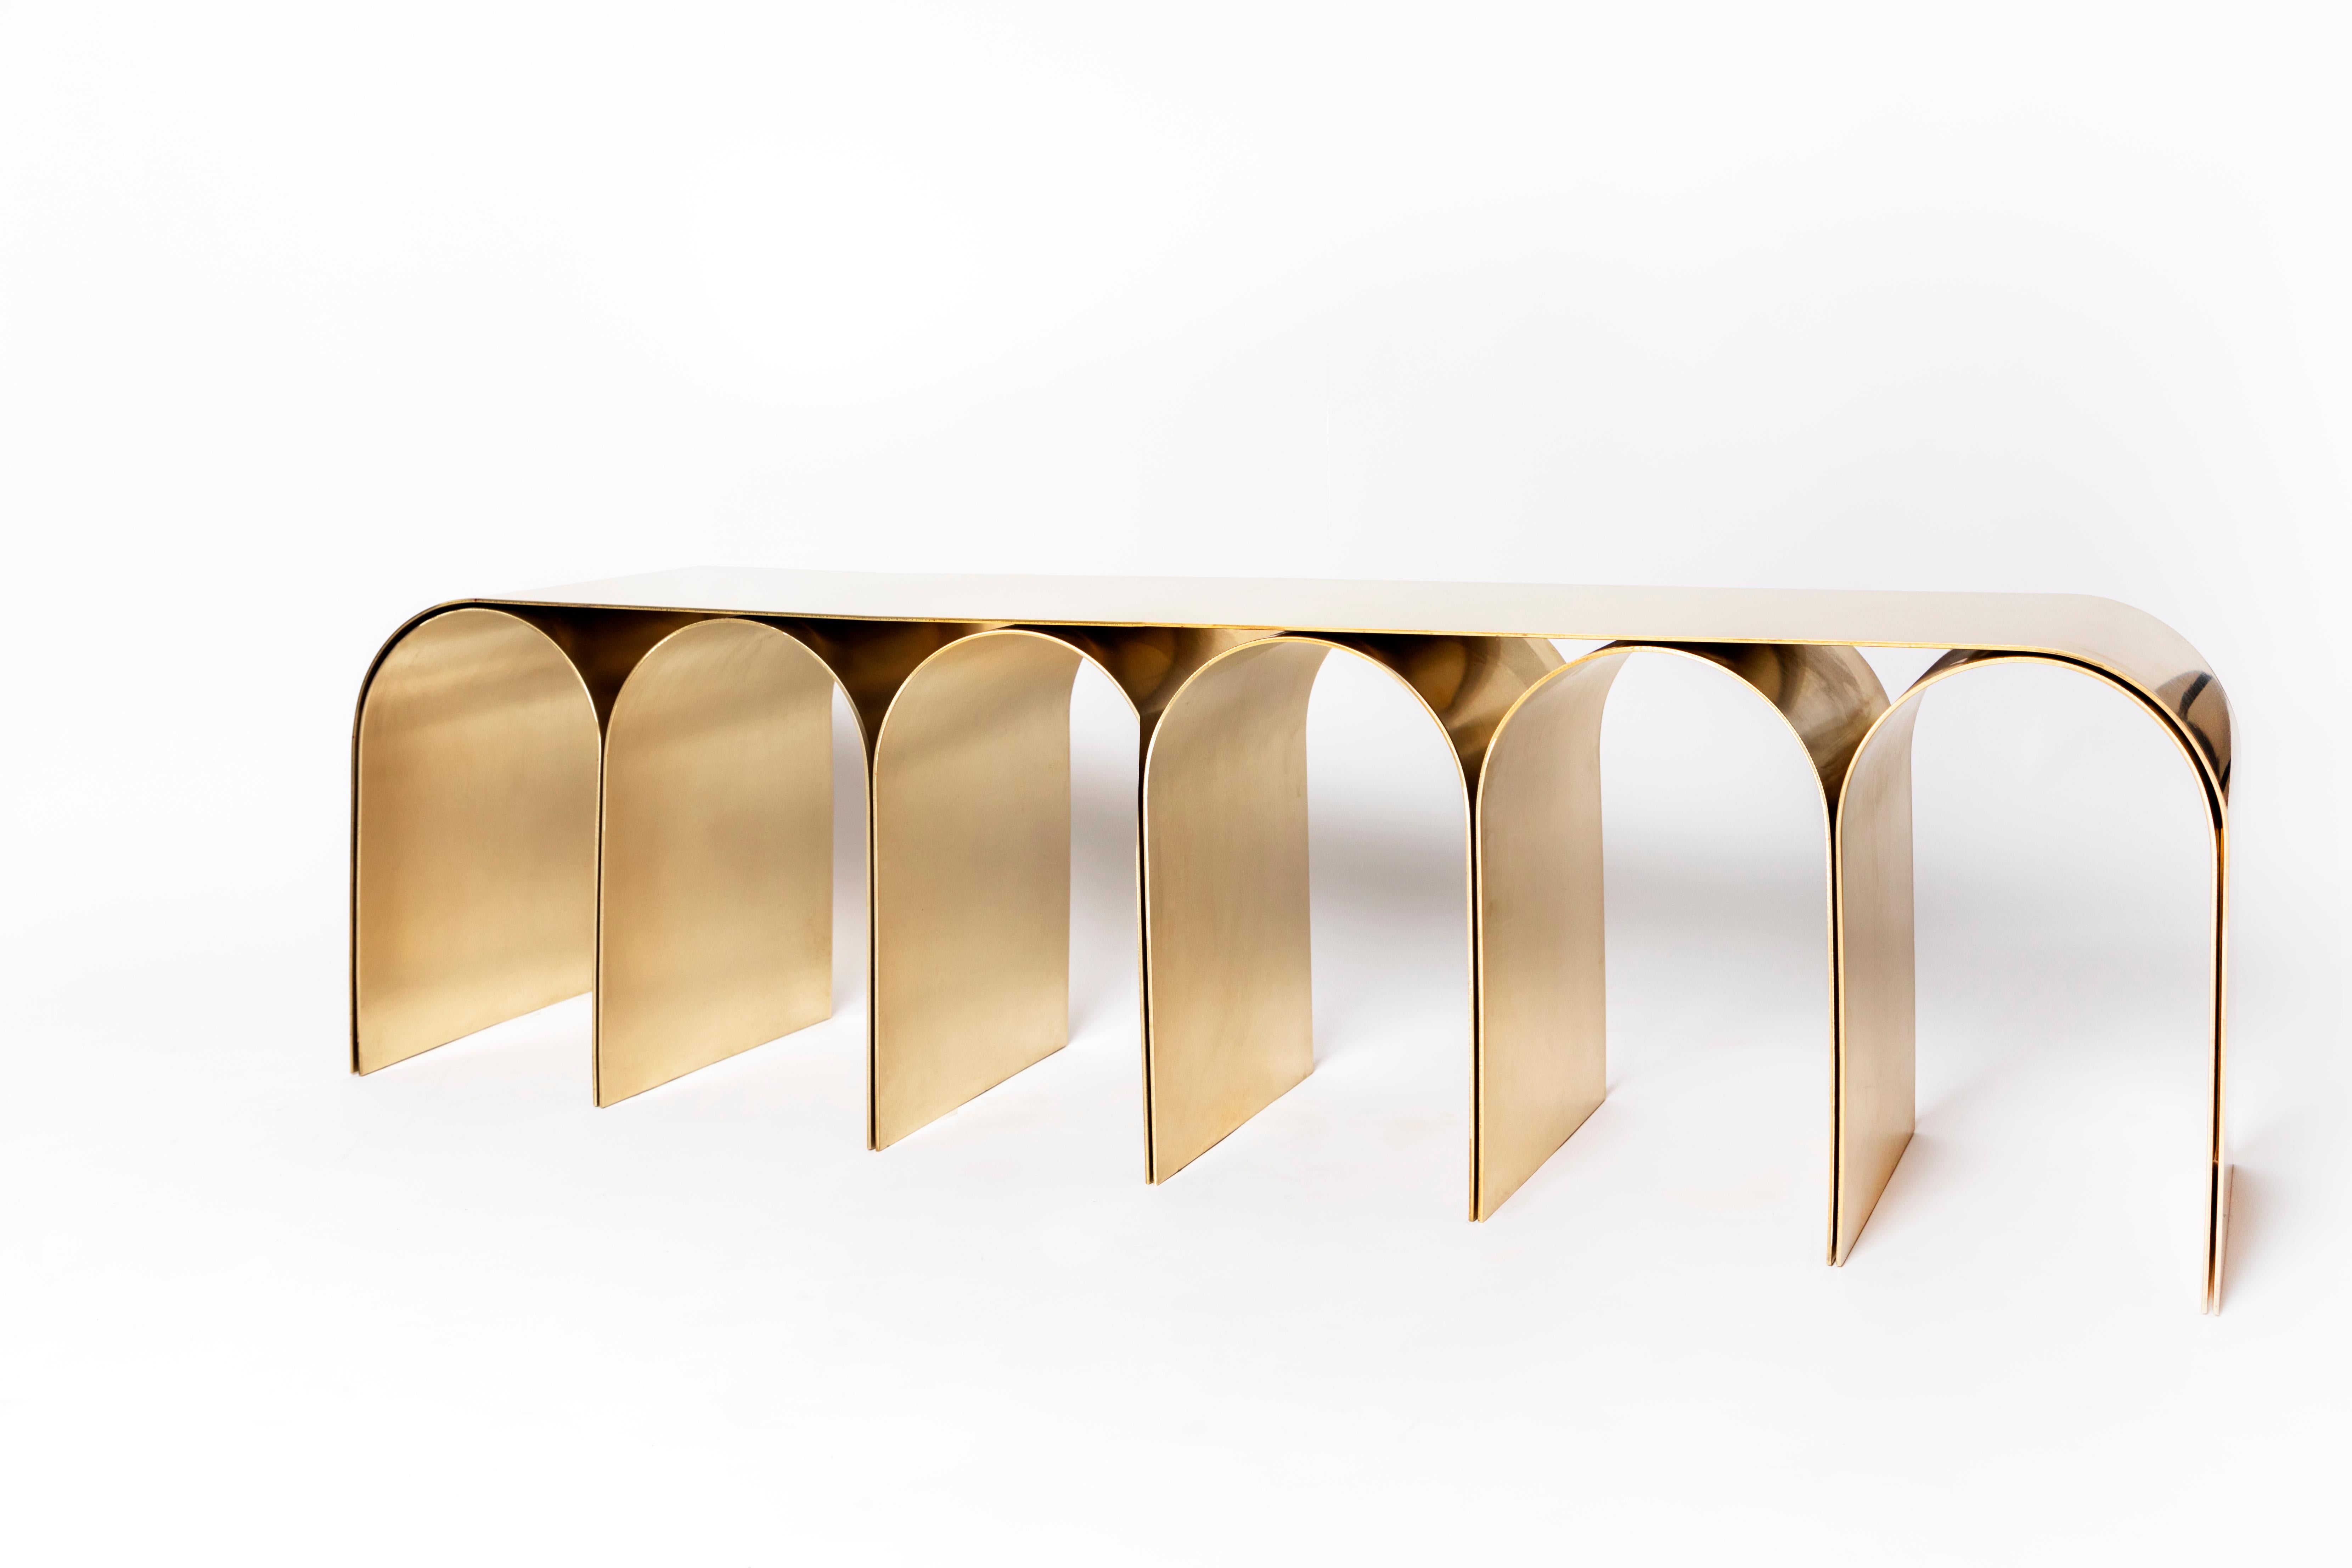 Brass gold arch bench by Pietro Franceschini
Sold exclusively by Galerie Philia
Materials: Brass
Finishes available: Natural, satin, polished, aged
Dimensions: W 155 x L 33 x 43cm
Manufacturer: Prinzivalli

Available finishes:
Steel (black,